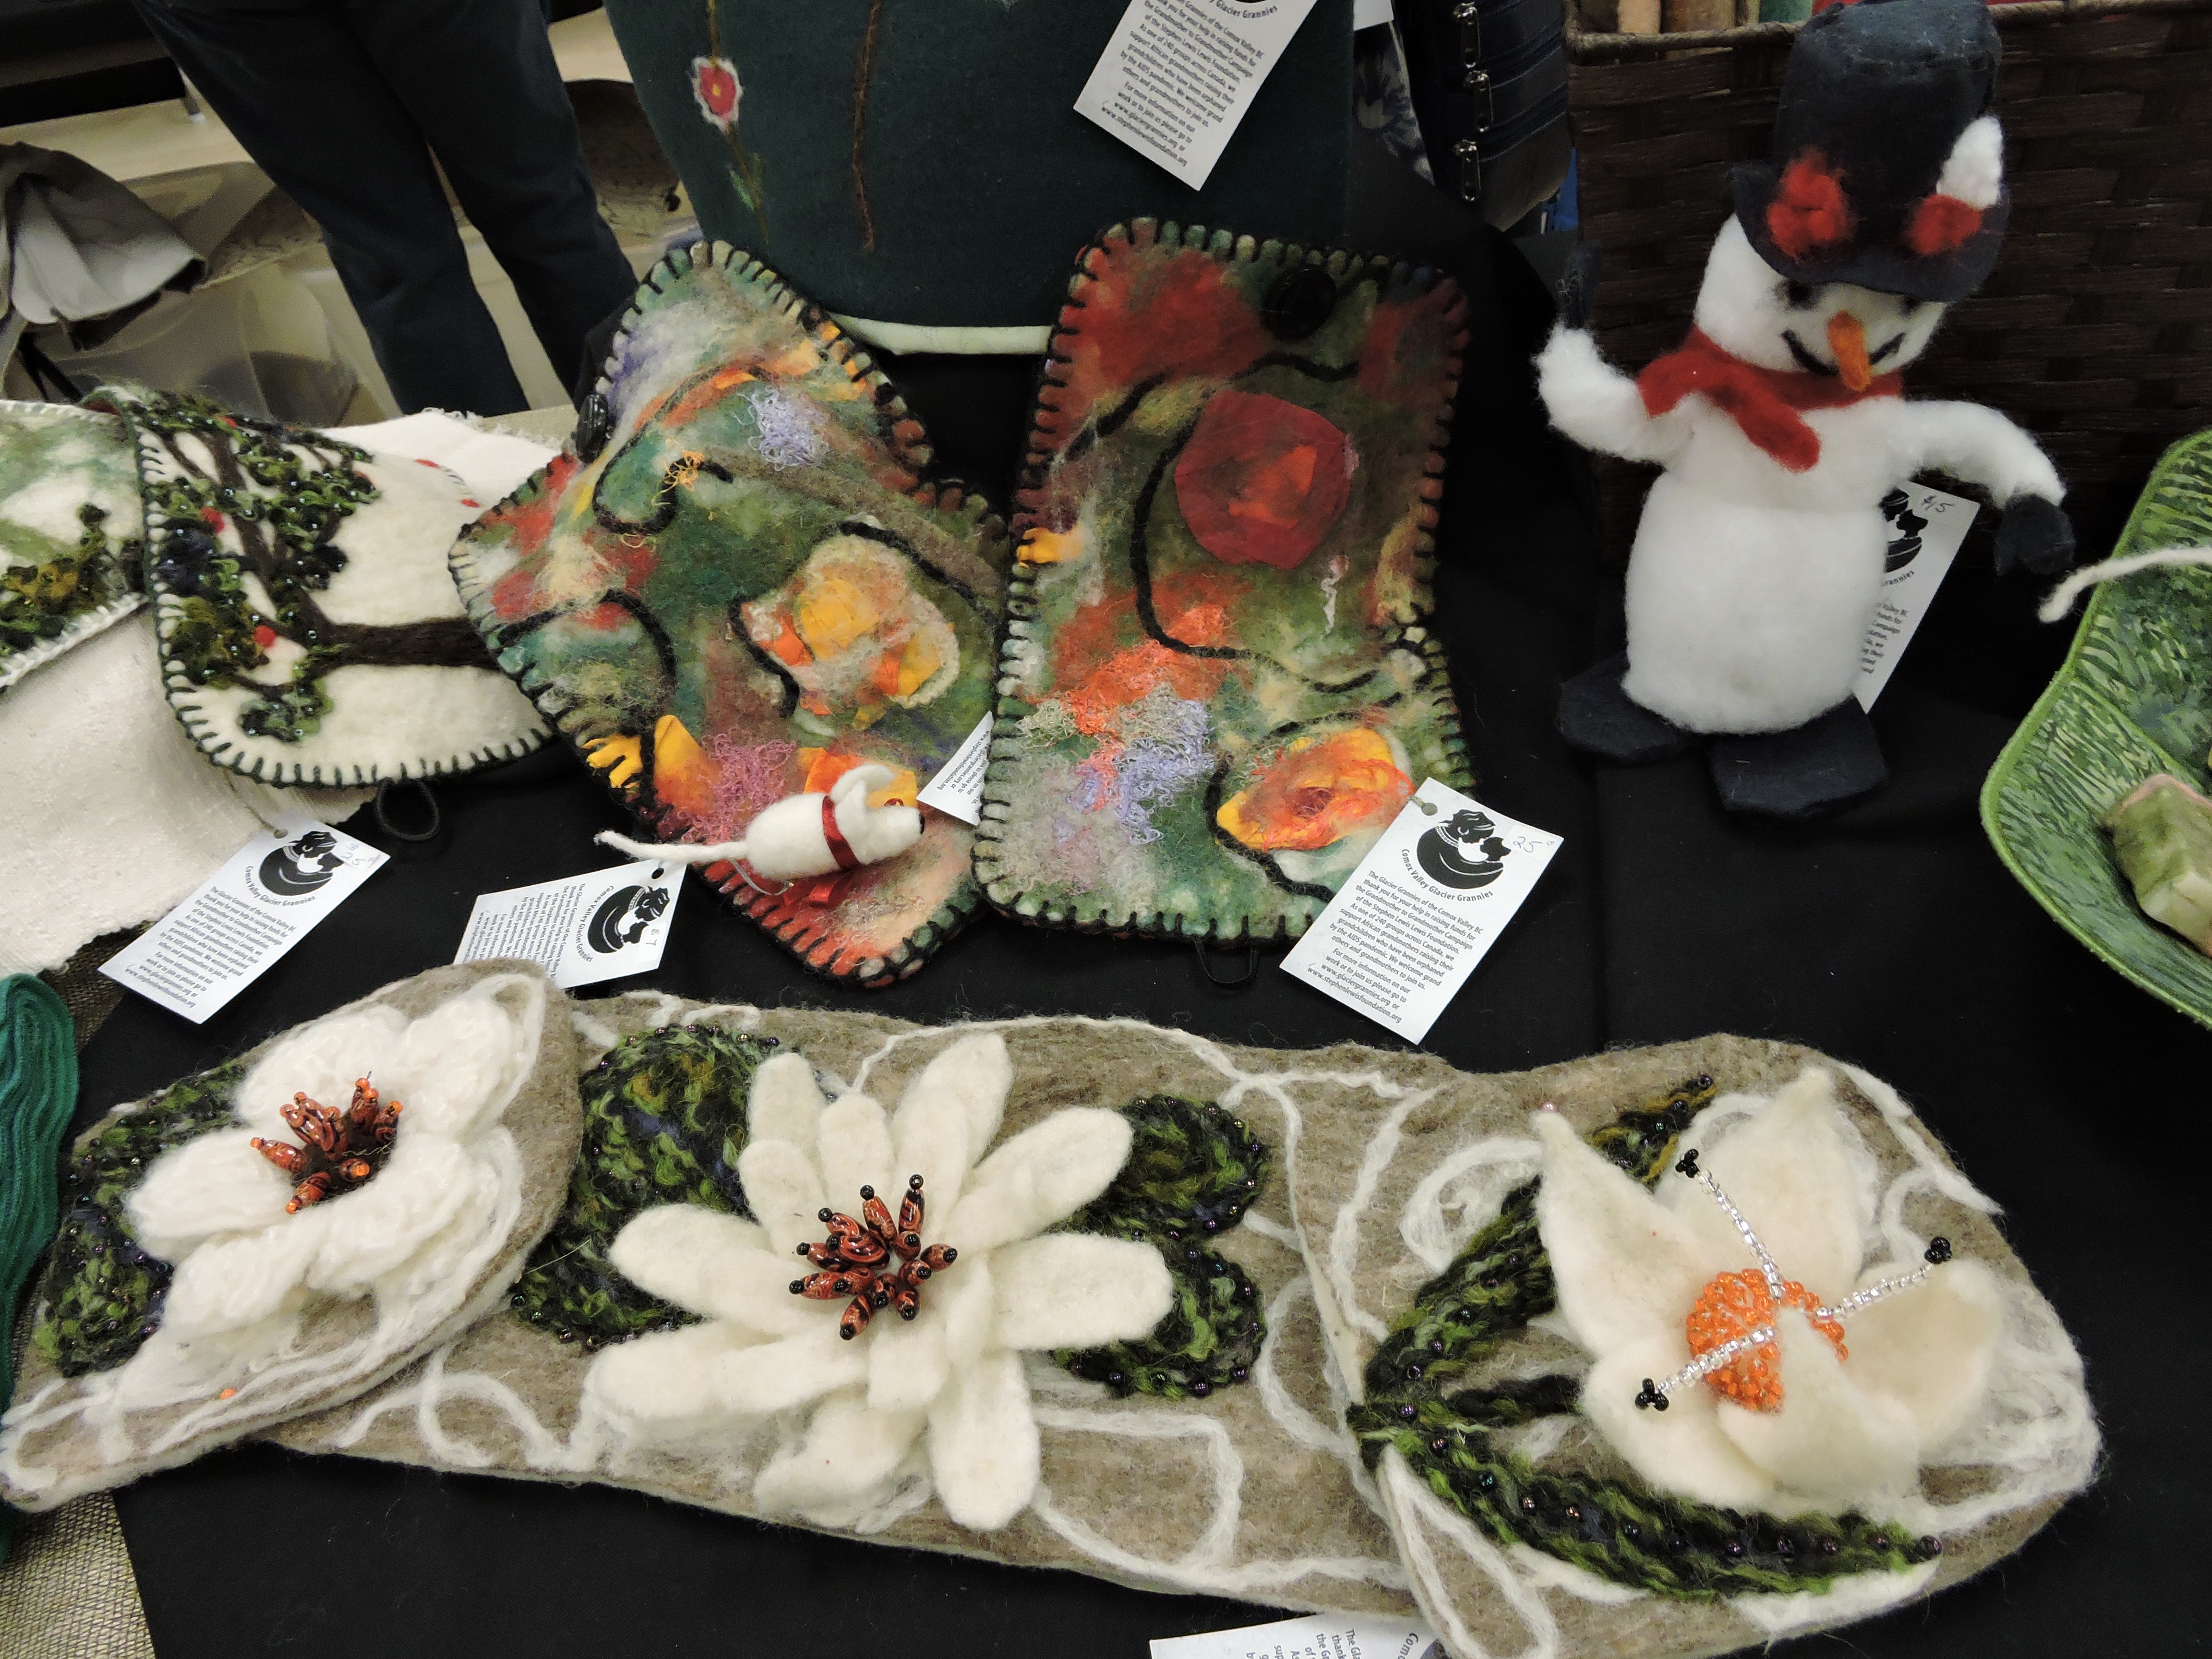 Felted items made by Glacier Grannies 2014